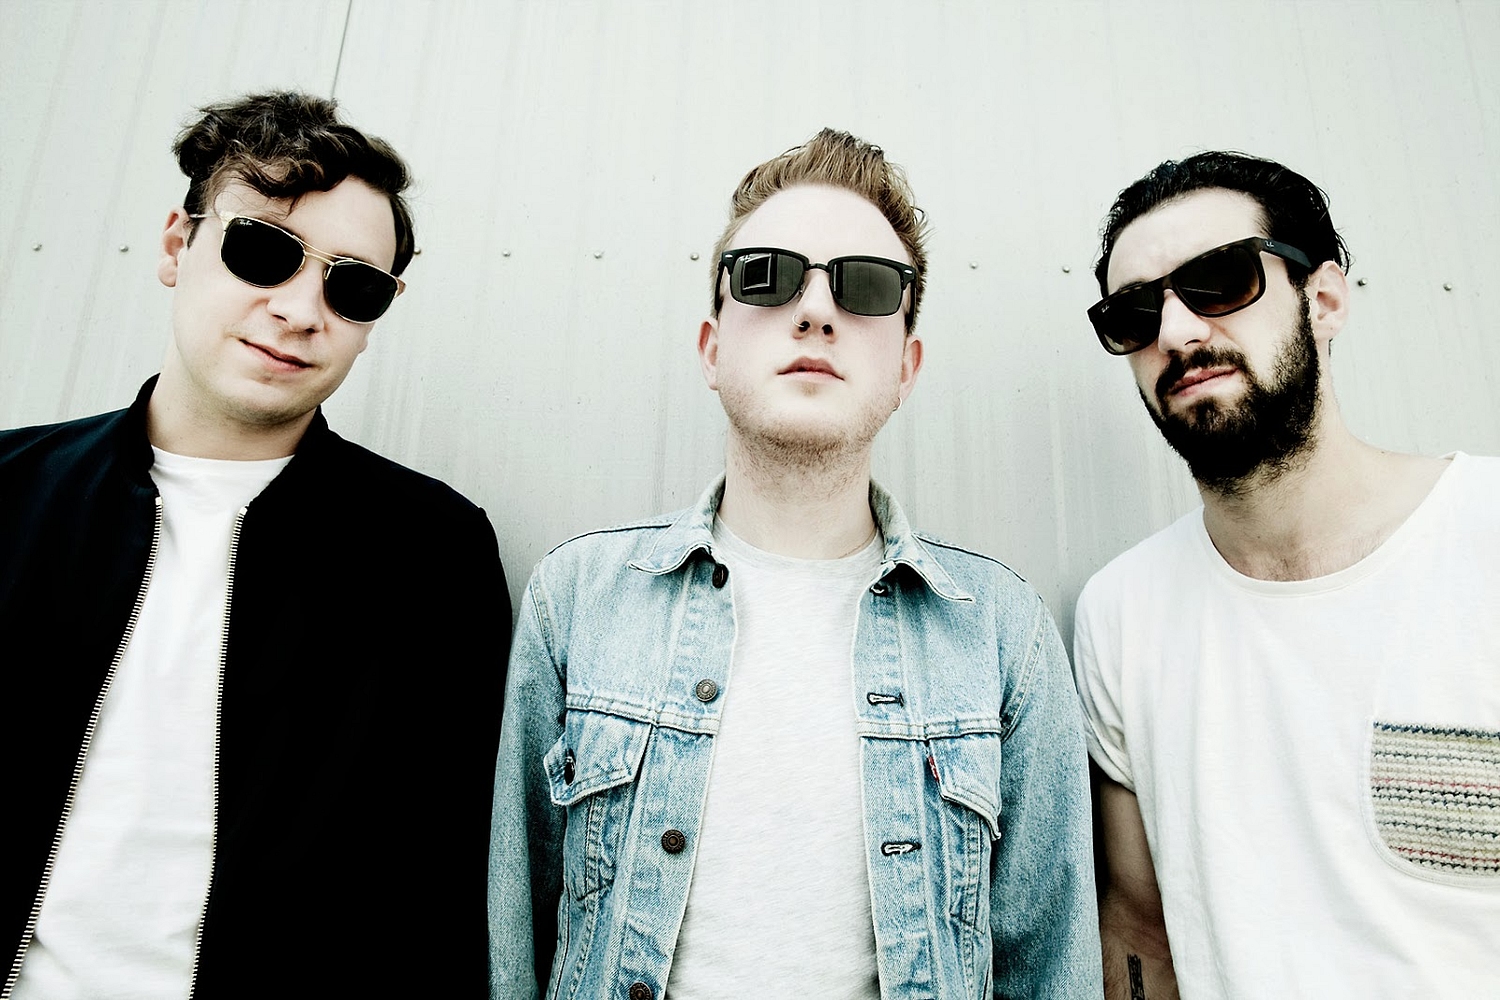 Two Door Cinema Club are set to return this year